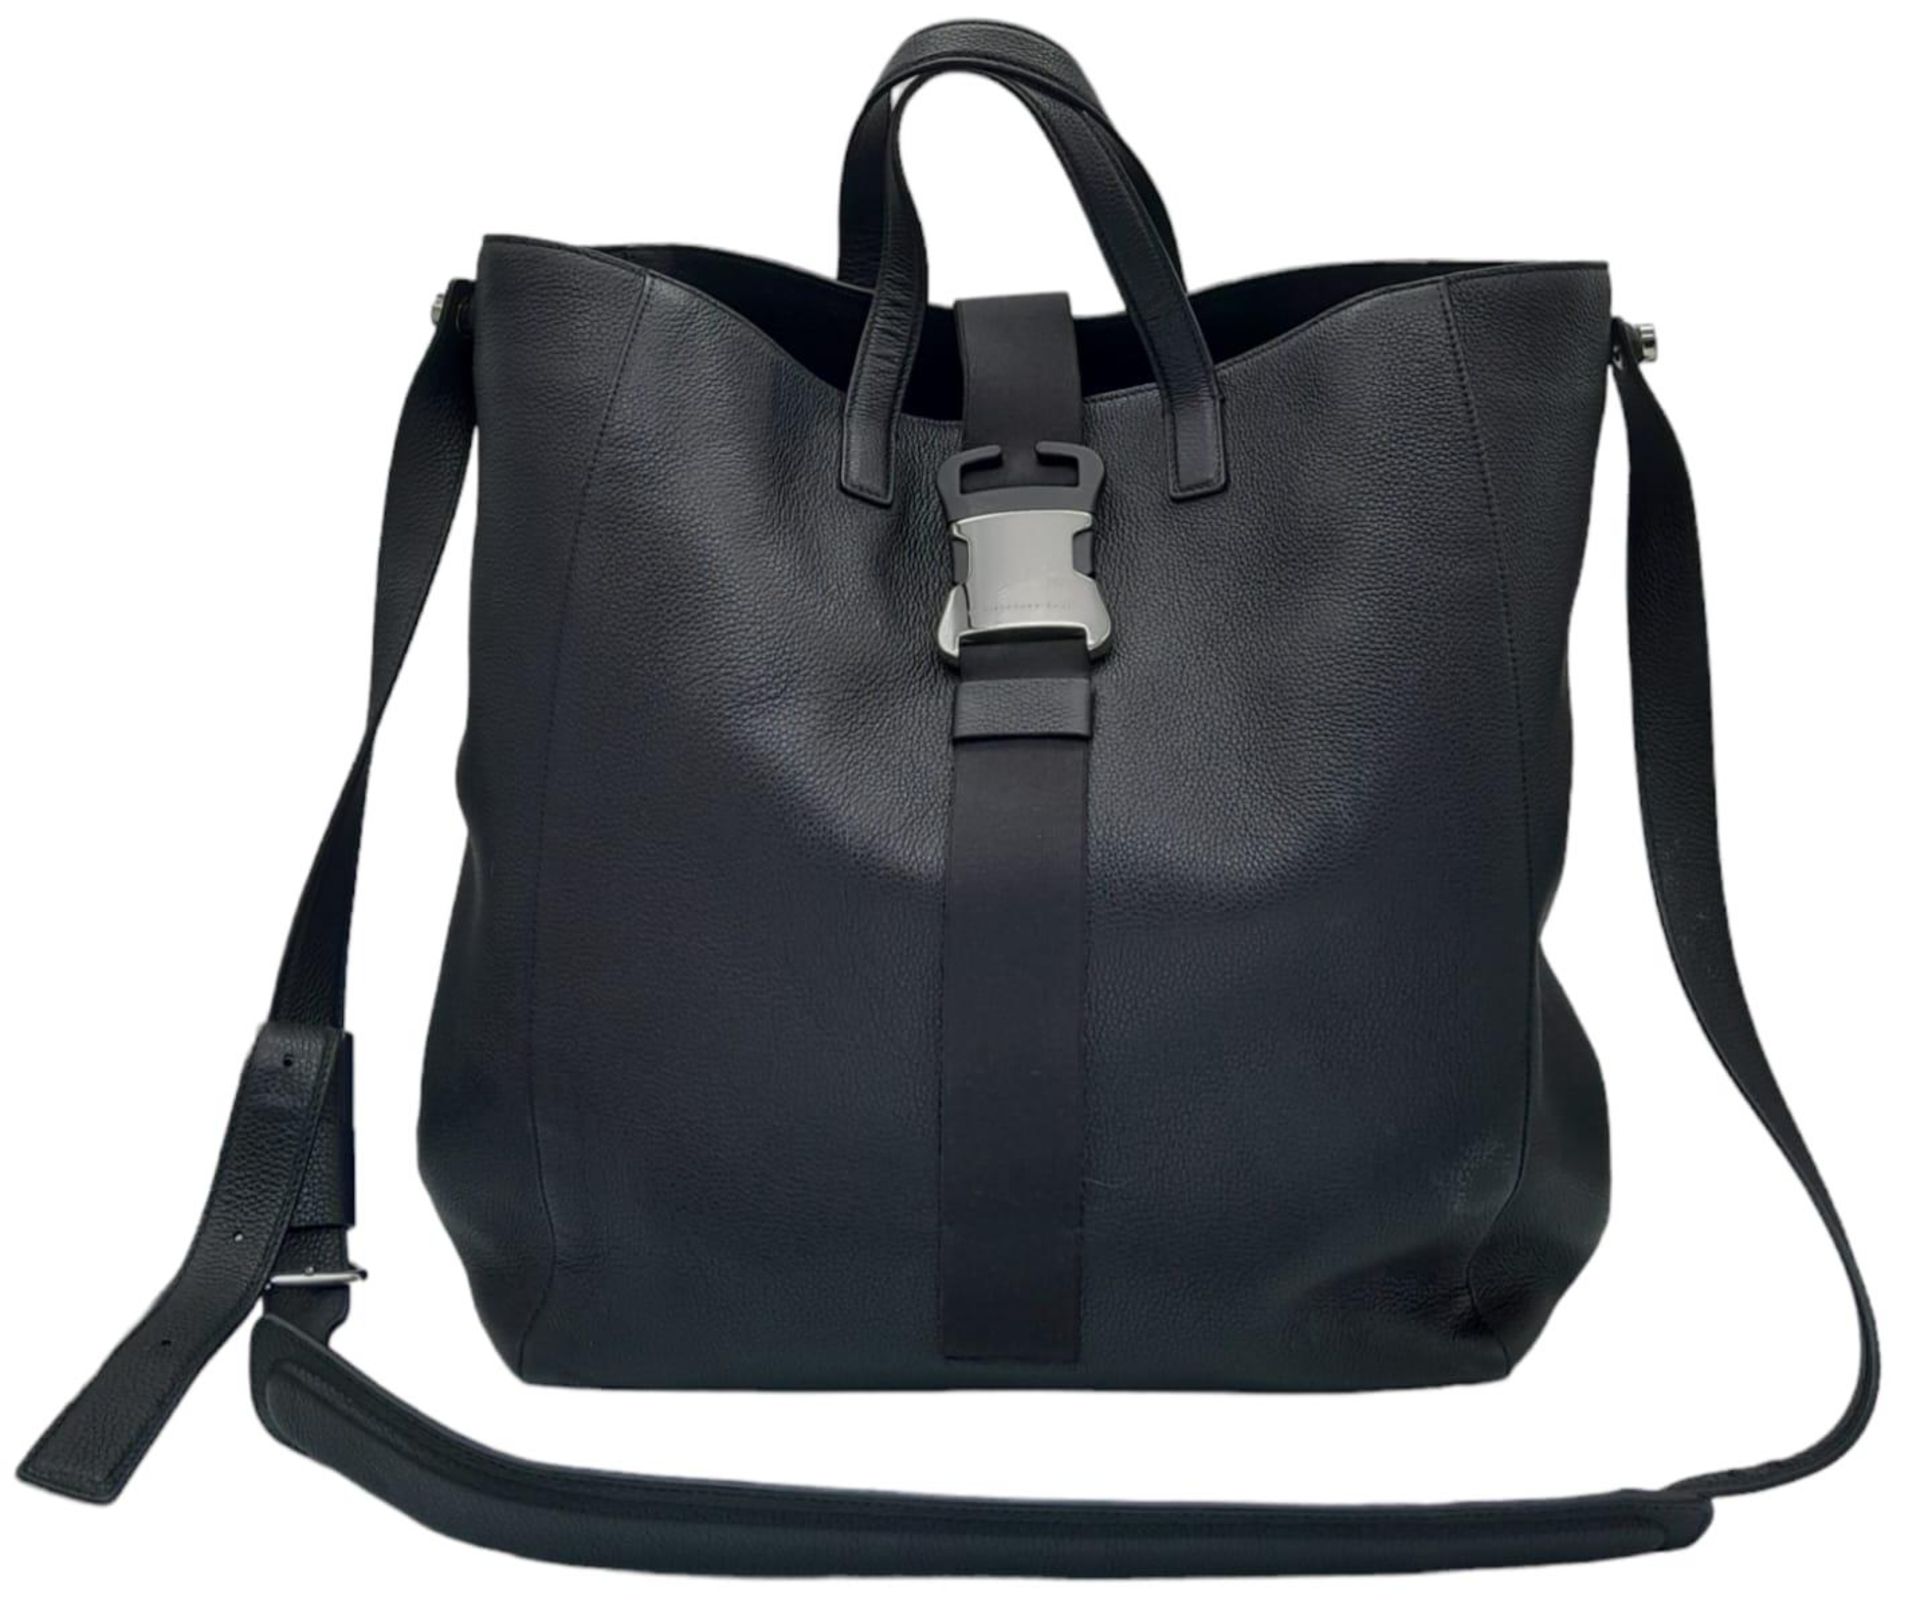 A Christopher Kane Black Tote Bag. Leather exterior with silver-toned hardware, two top handles,